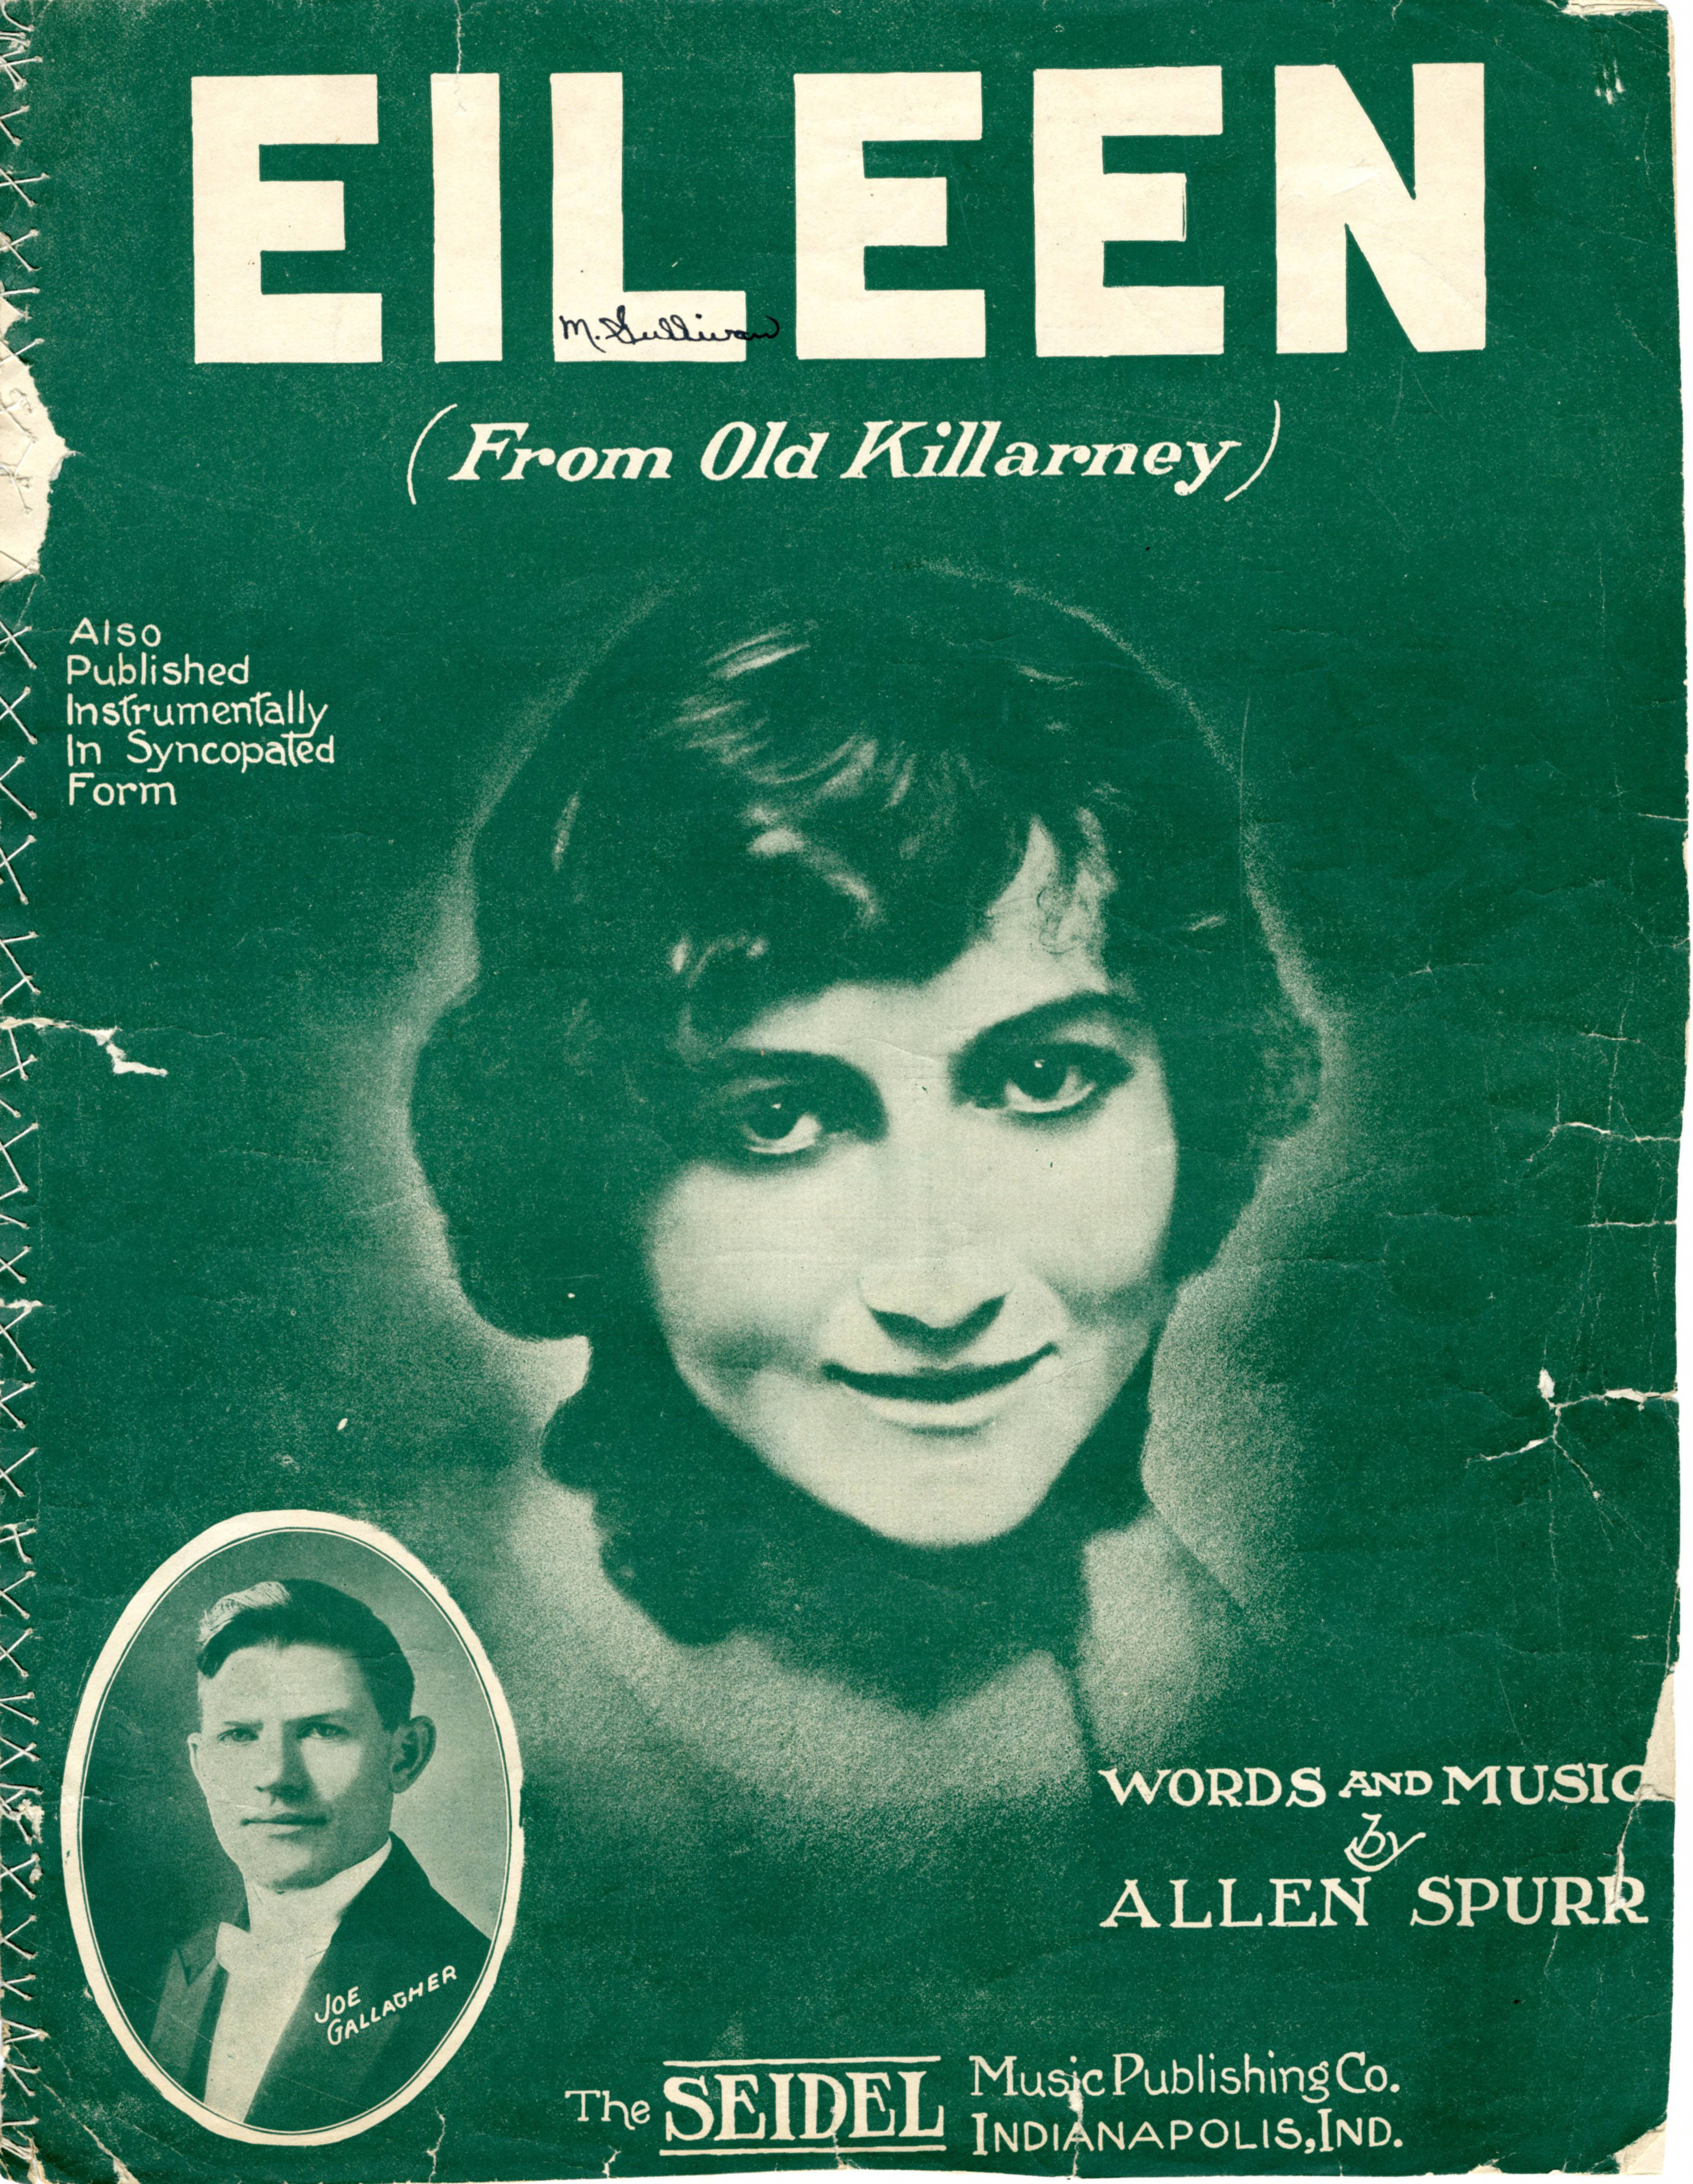 Sheet music cover - EILEEN - FROM OLD KILLARNEY (1914)